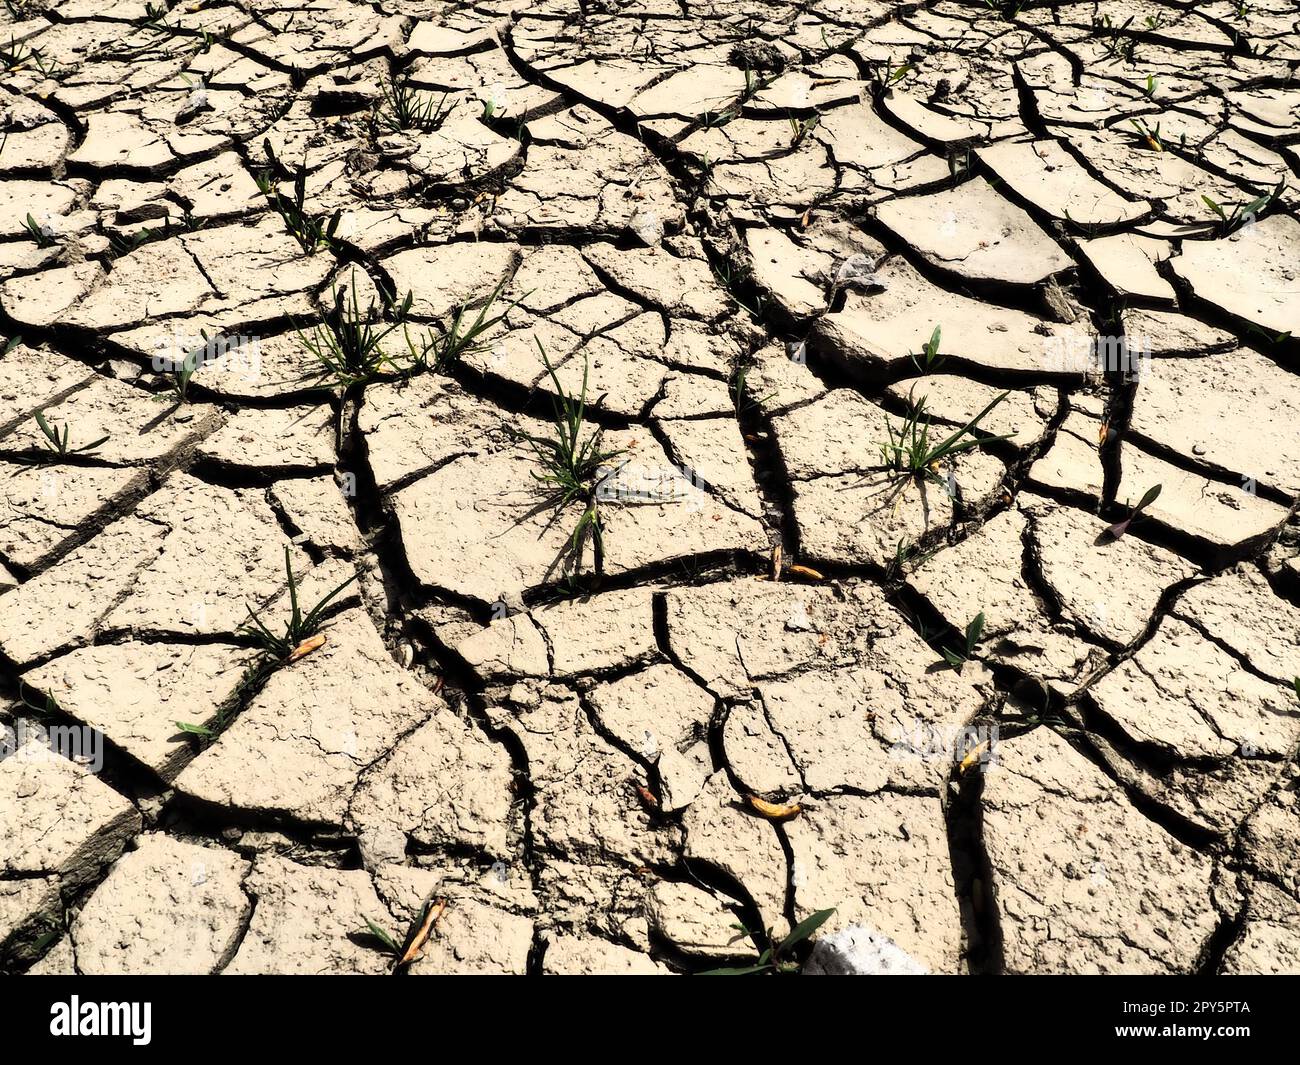 Deep cracks in the land as a symbol of hot climate and drought. Desert and cracked ground. Uneven, swollen ground. Emptiness and death. Ecological and natural theme. Stock Photo